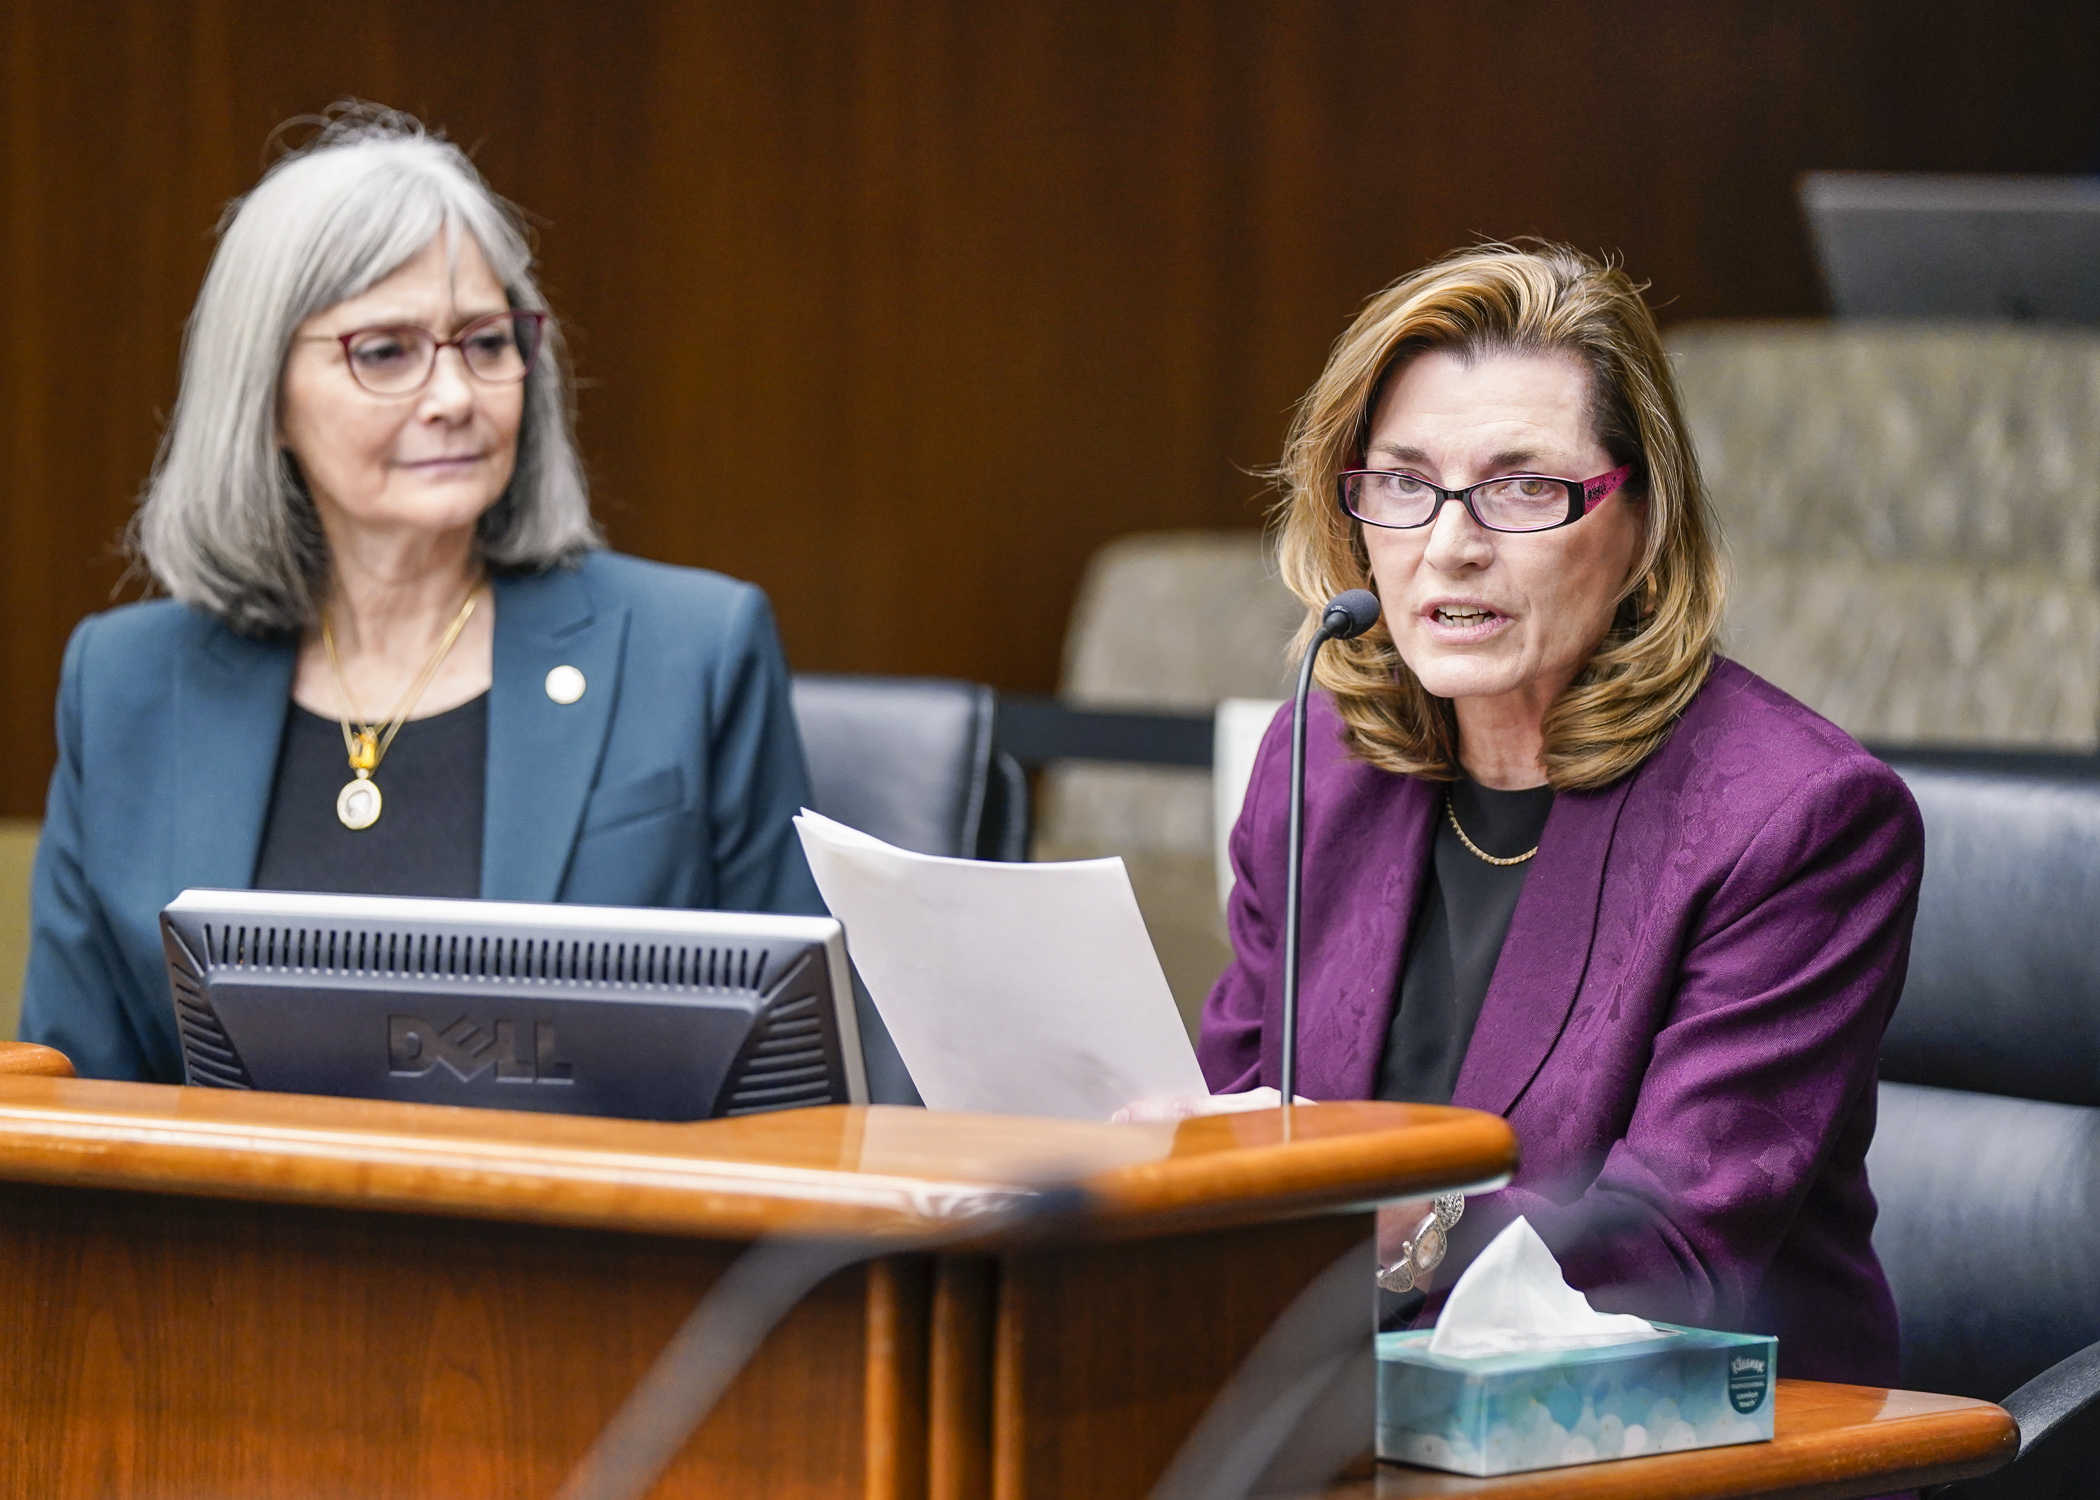 Susan Morgan, chief operating officer for Accra Care, testifies before the House Human Services Policy Committee Jan. 30 in support of HF585, which would increase the rate of reimbursement for home care services. (Photo by Catherine Davis)